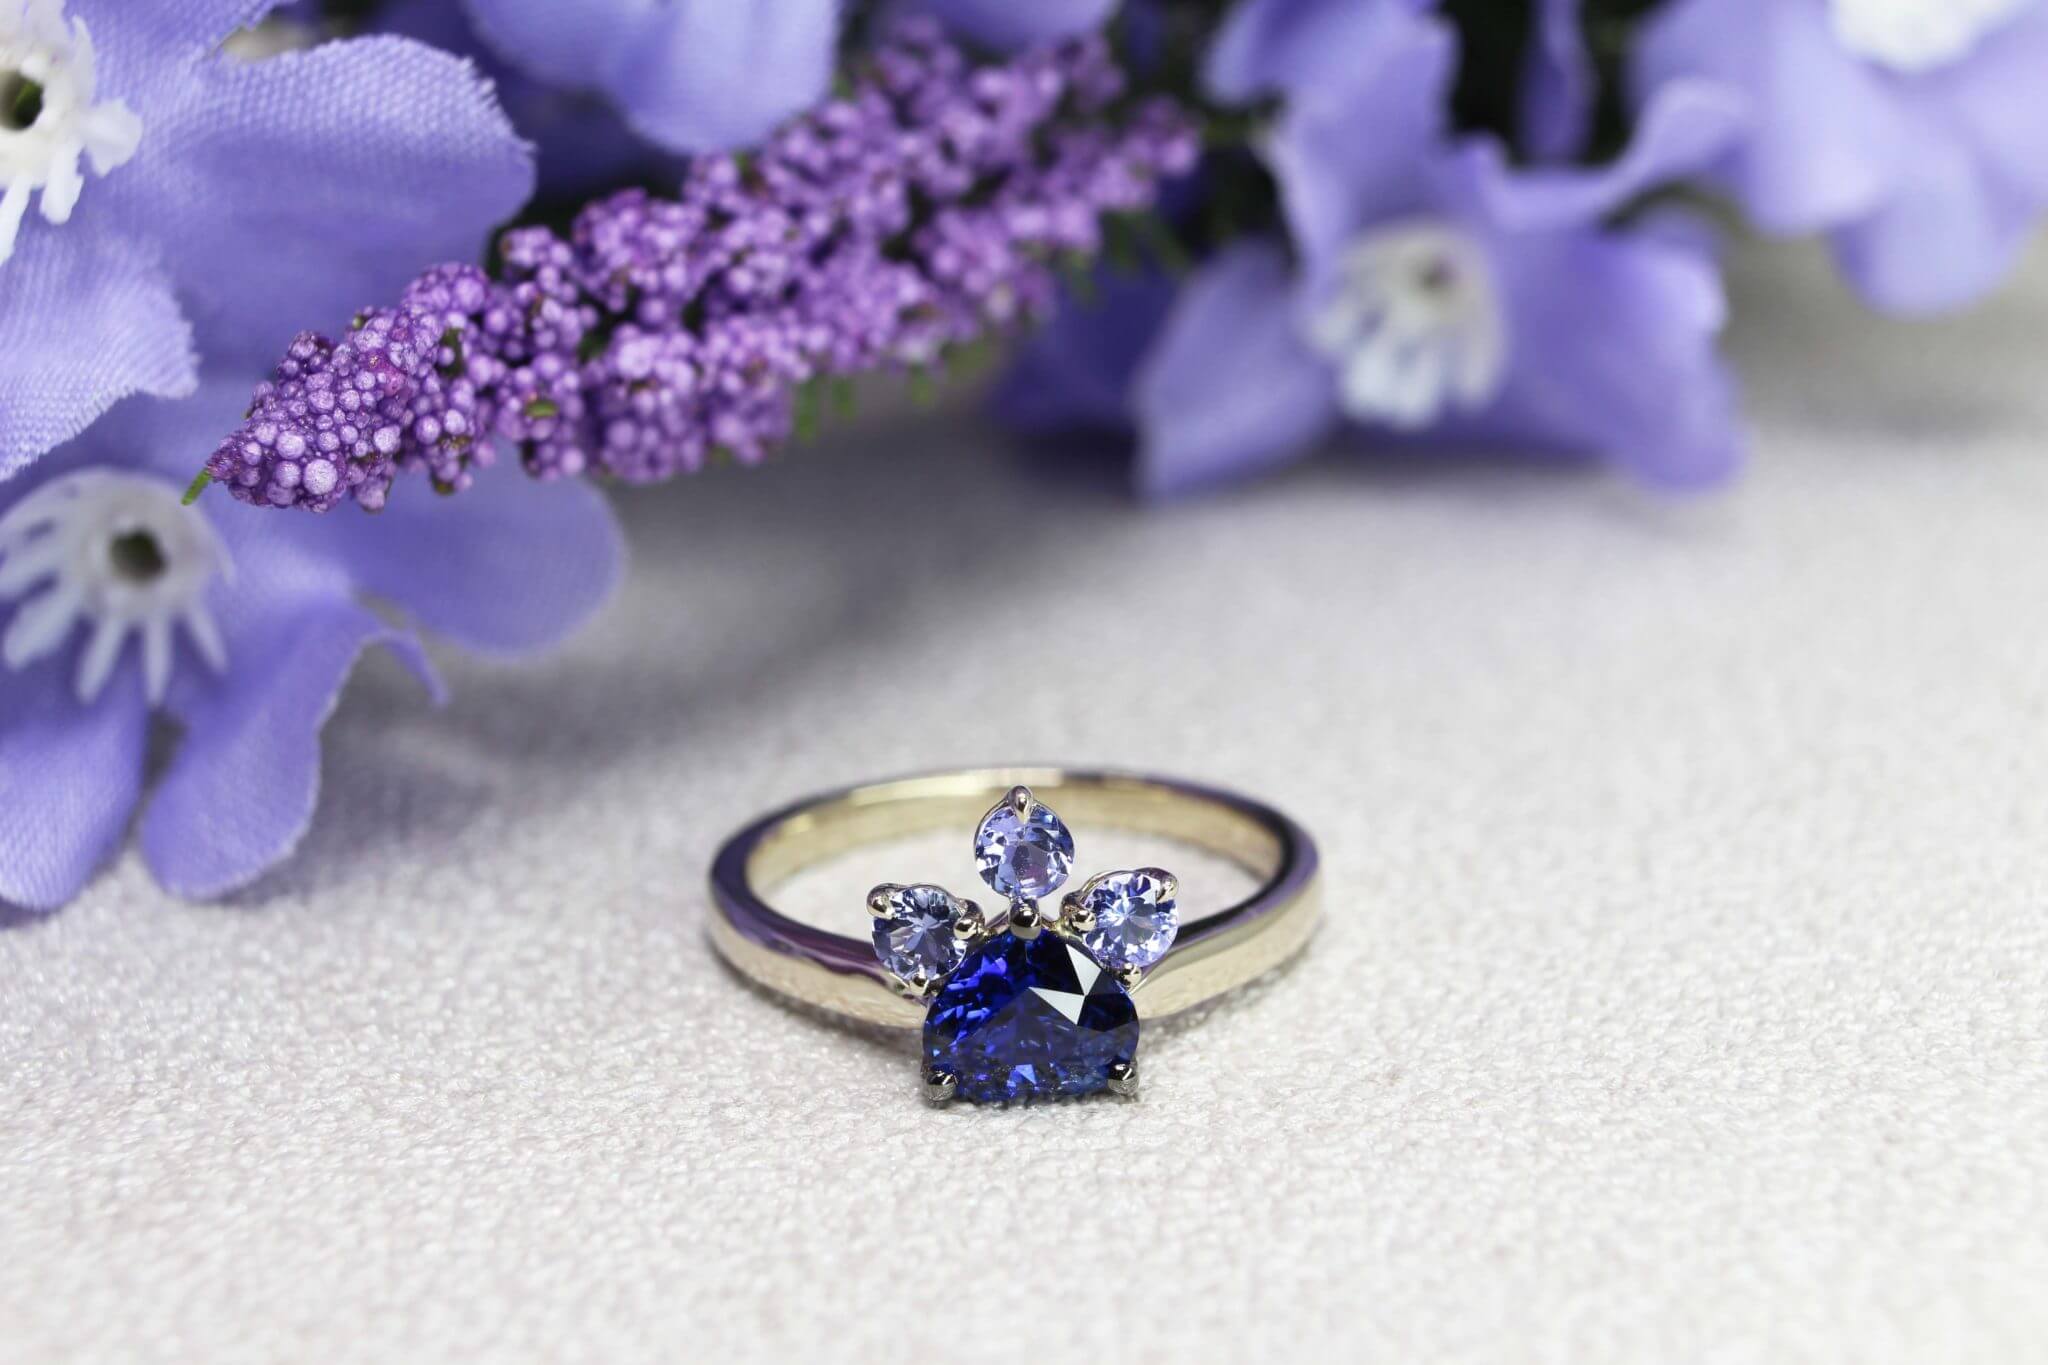 Personalized Engagement ring with sapphire cut to an elegant and unique heartshape, this deep blue sapphire ring appears magnificent in its form. This bespoke engagement ring speaks a unique story | Local Singapore Bespoke Jeweller in Personalized Engagement ring and Wedding Jewellery.